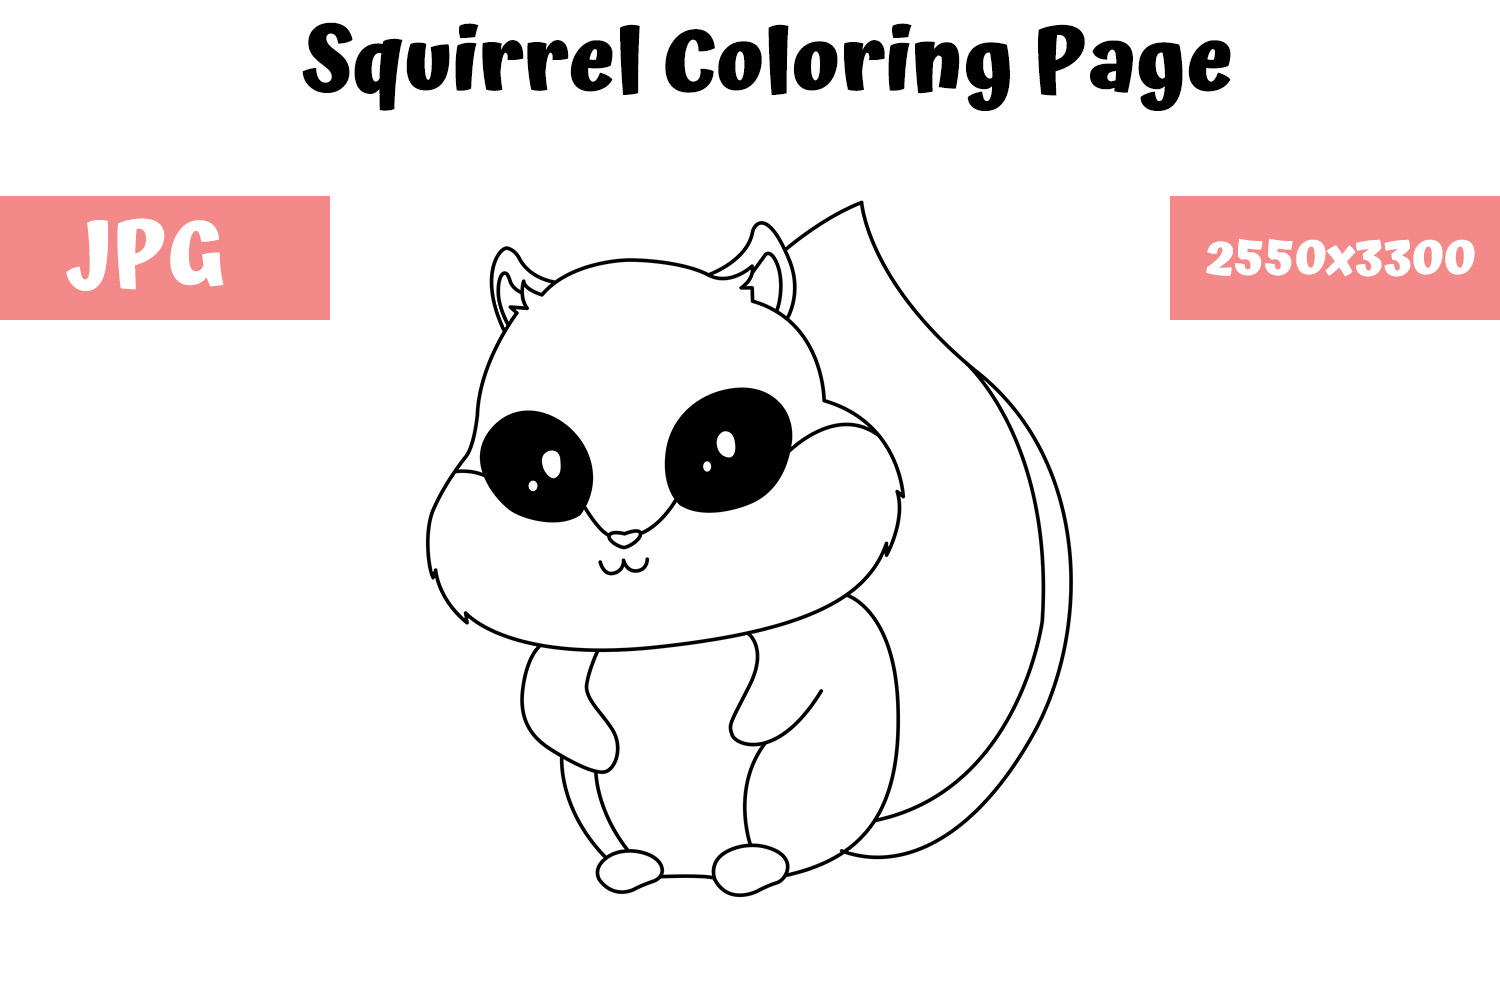 Squirrel Coloring Book Page for Kids (Graphic) by MyBeautifulFiles